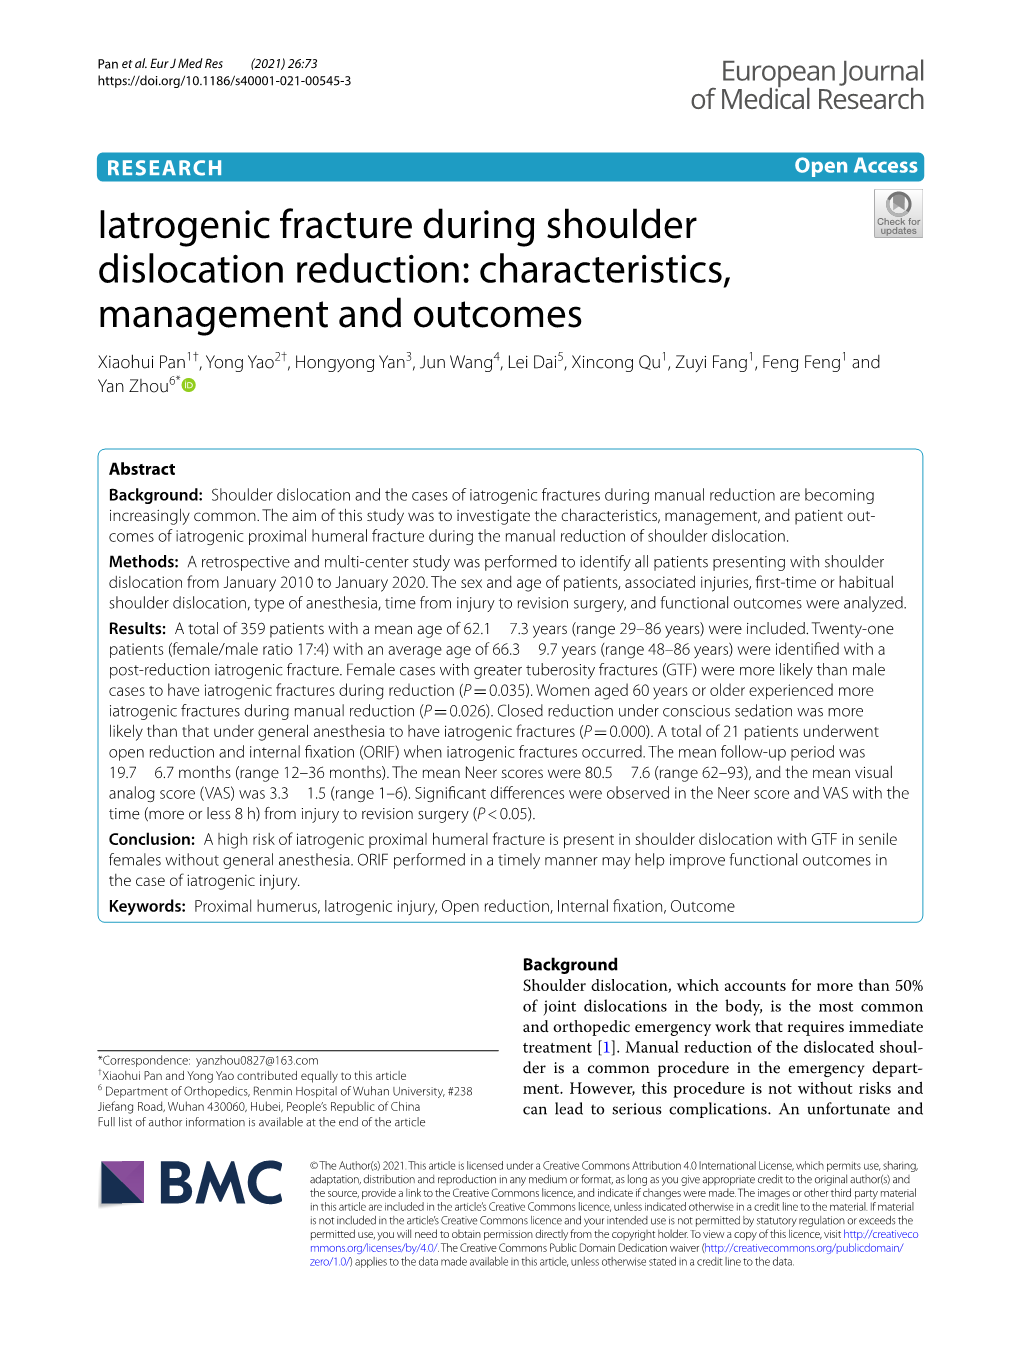 Iatrogenic Fracture During Shoulder Dislocation Reduction